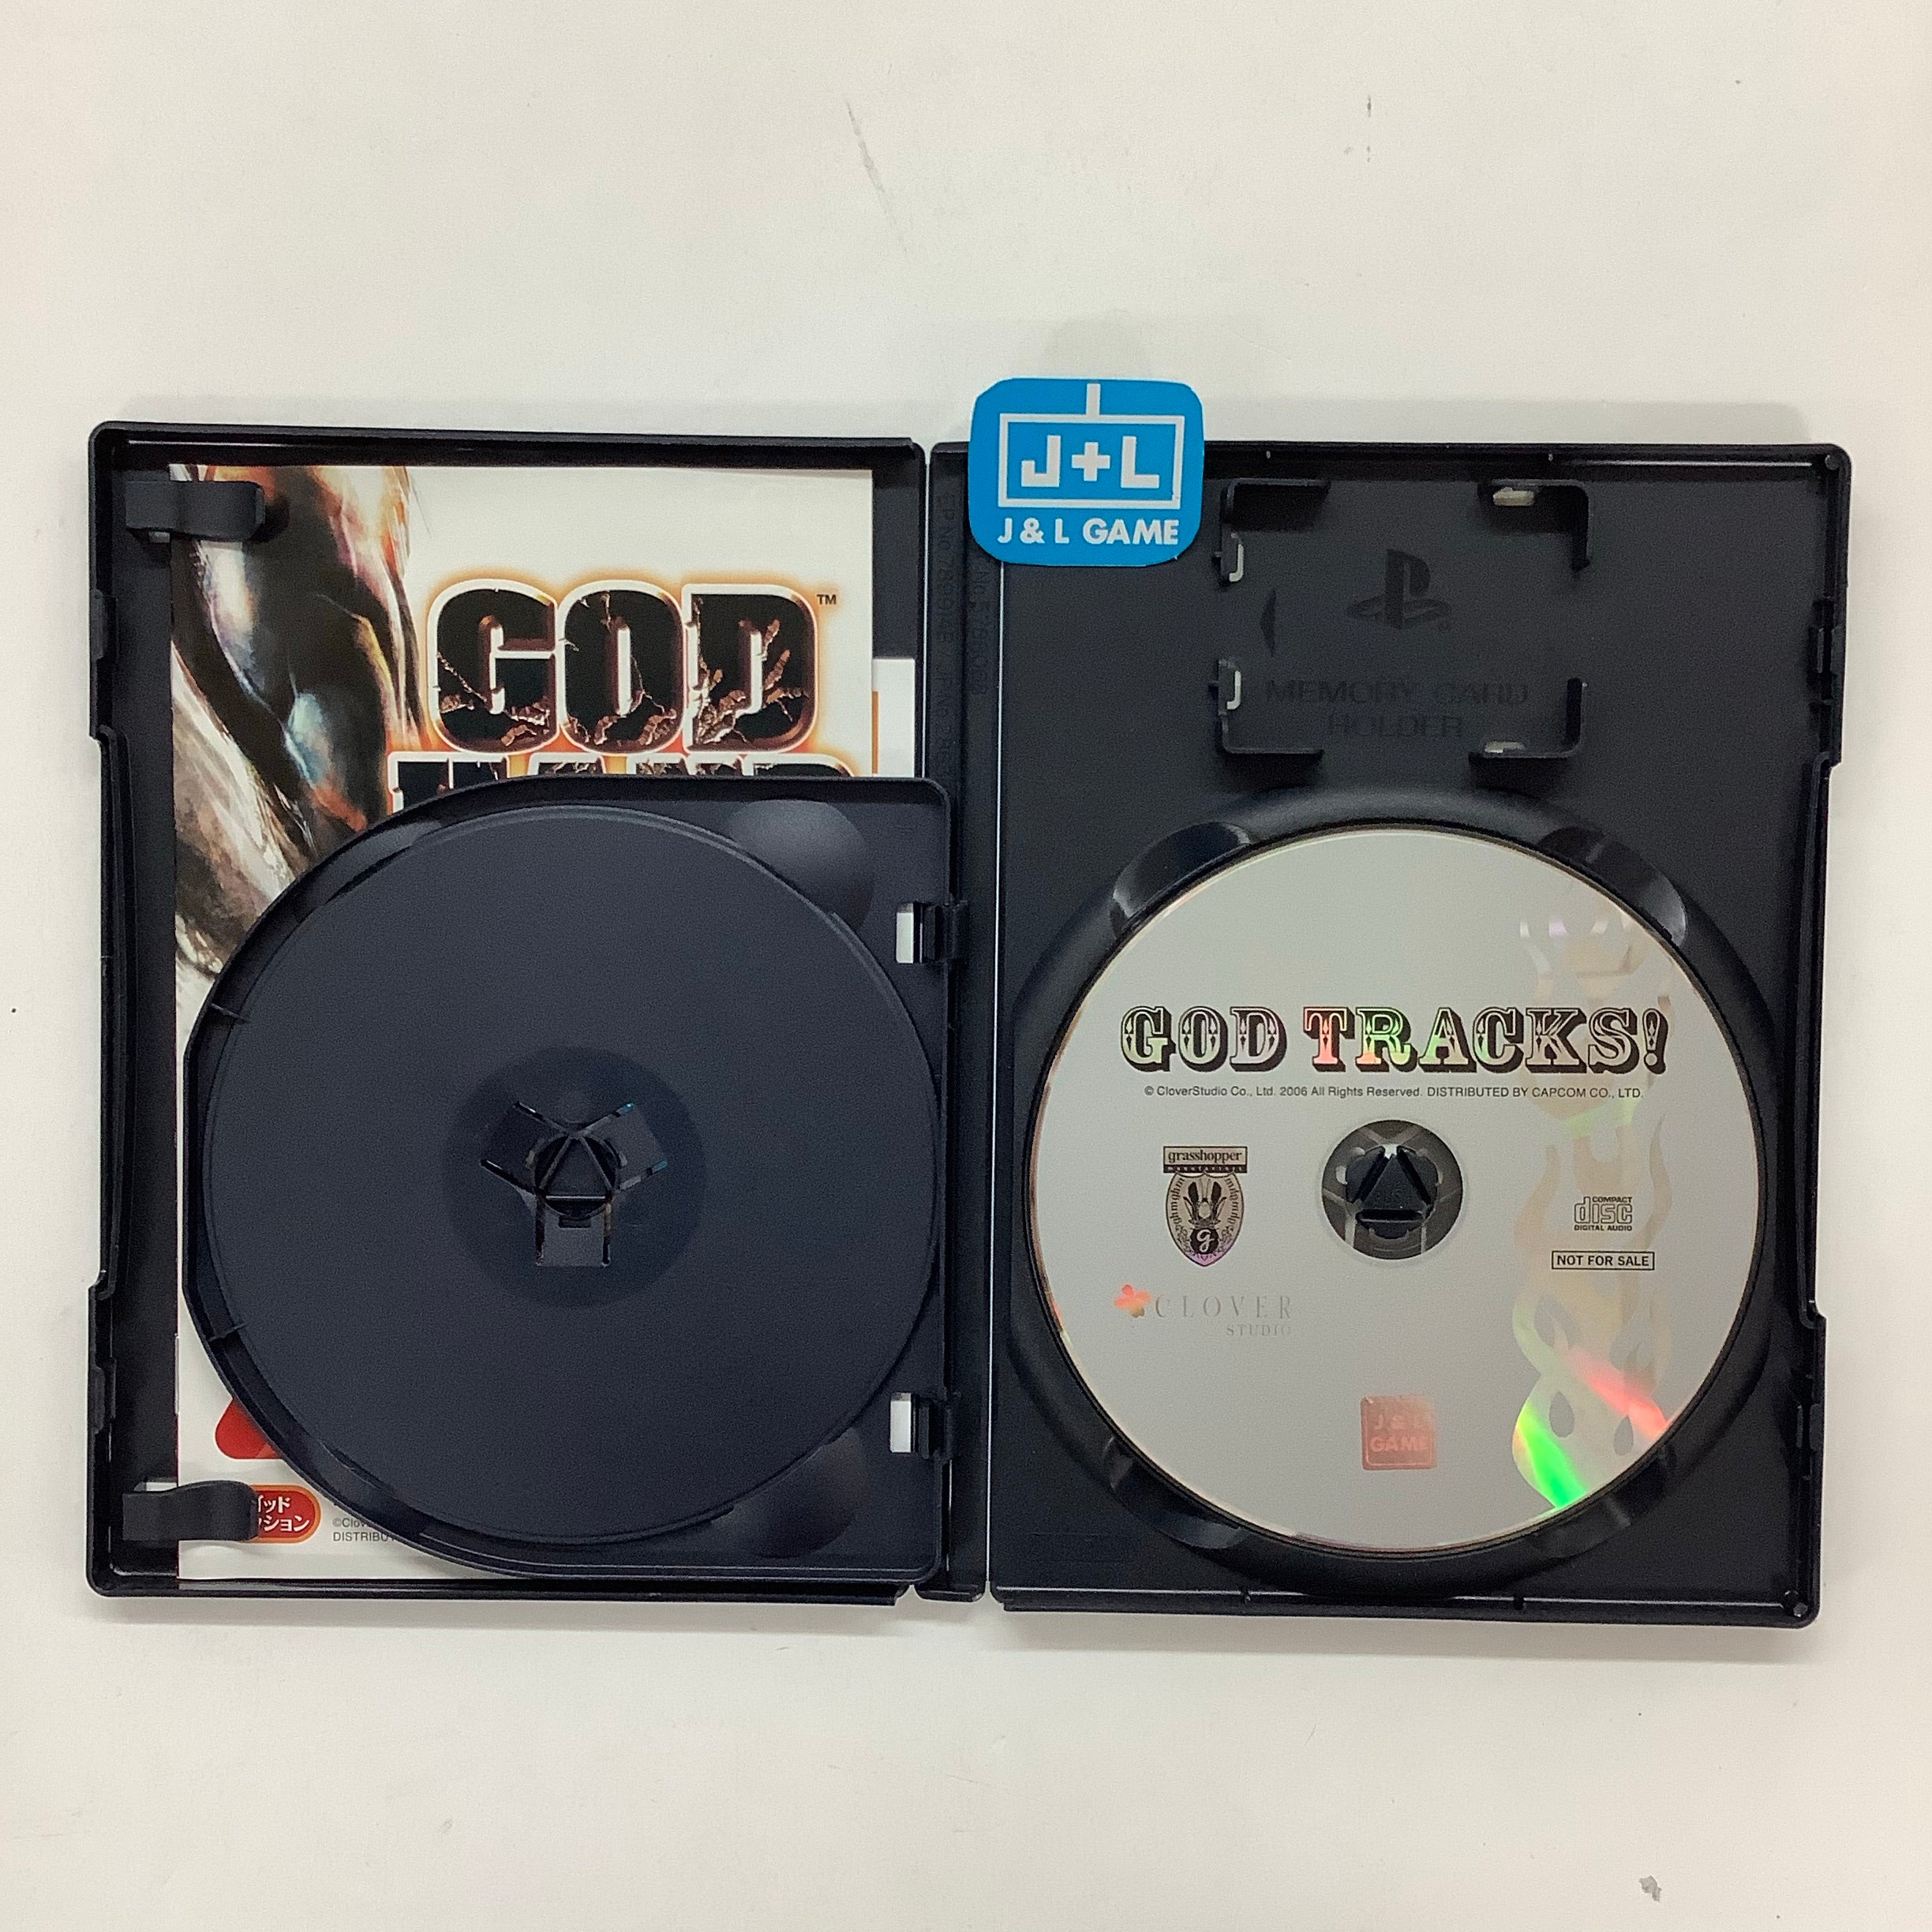 God Hand - (PS2) PlayStation 2 [Pre-Owned] (Japanese Import) Video Games Capcom   